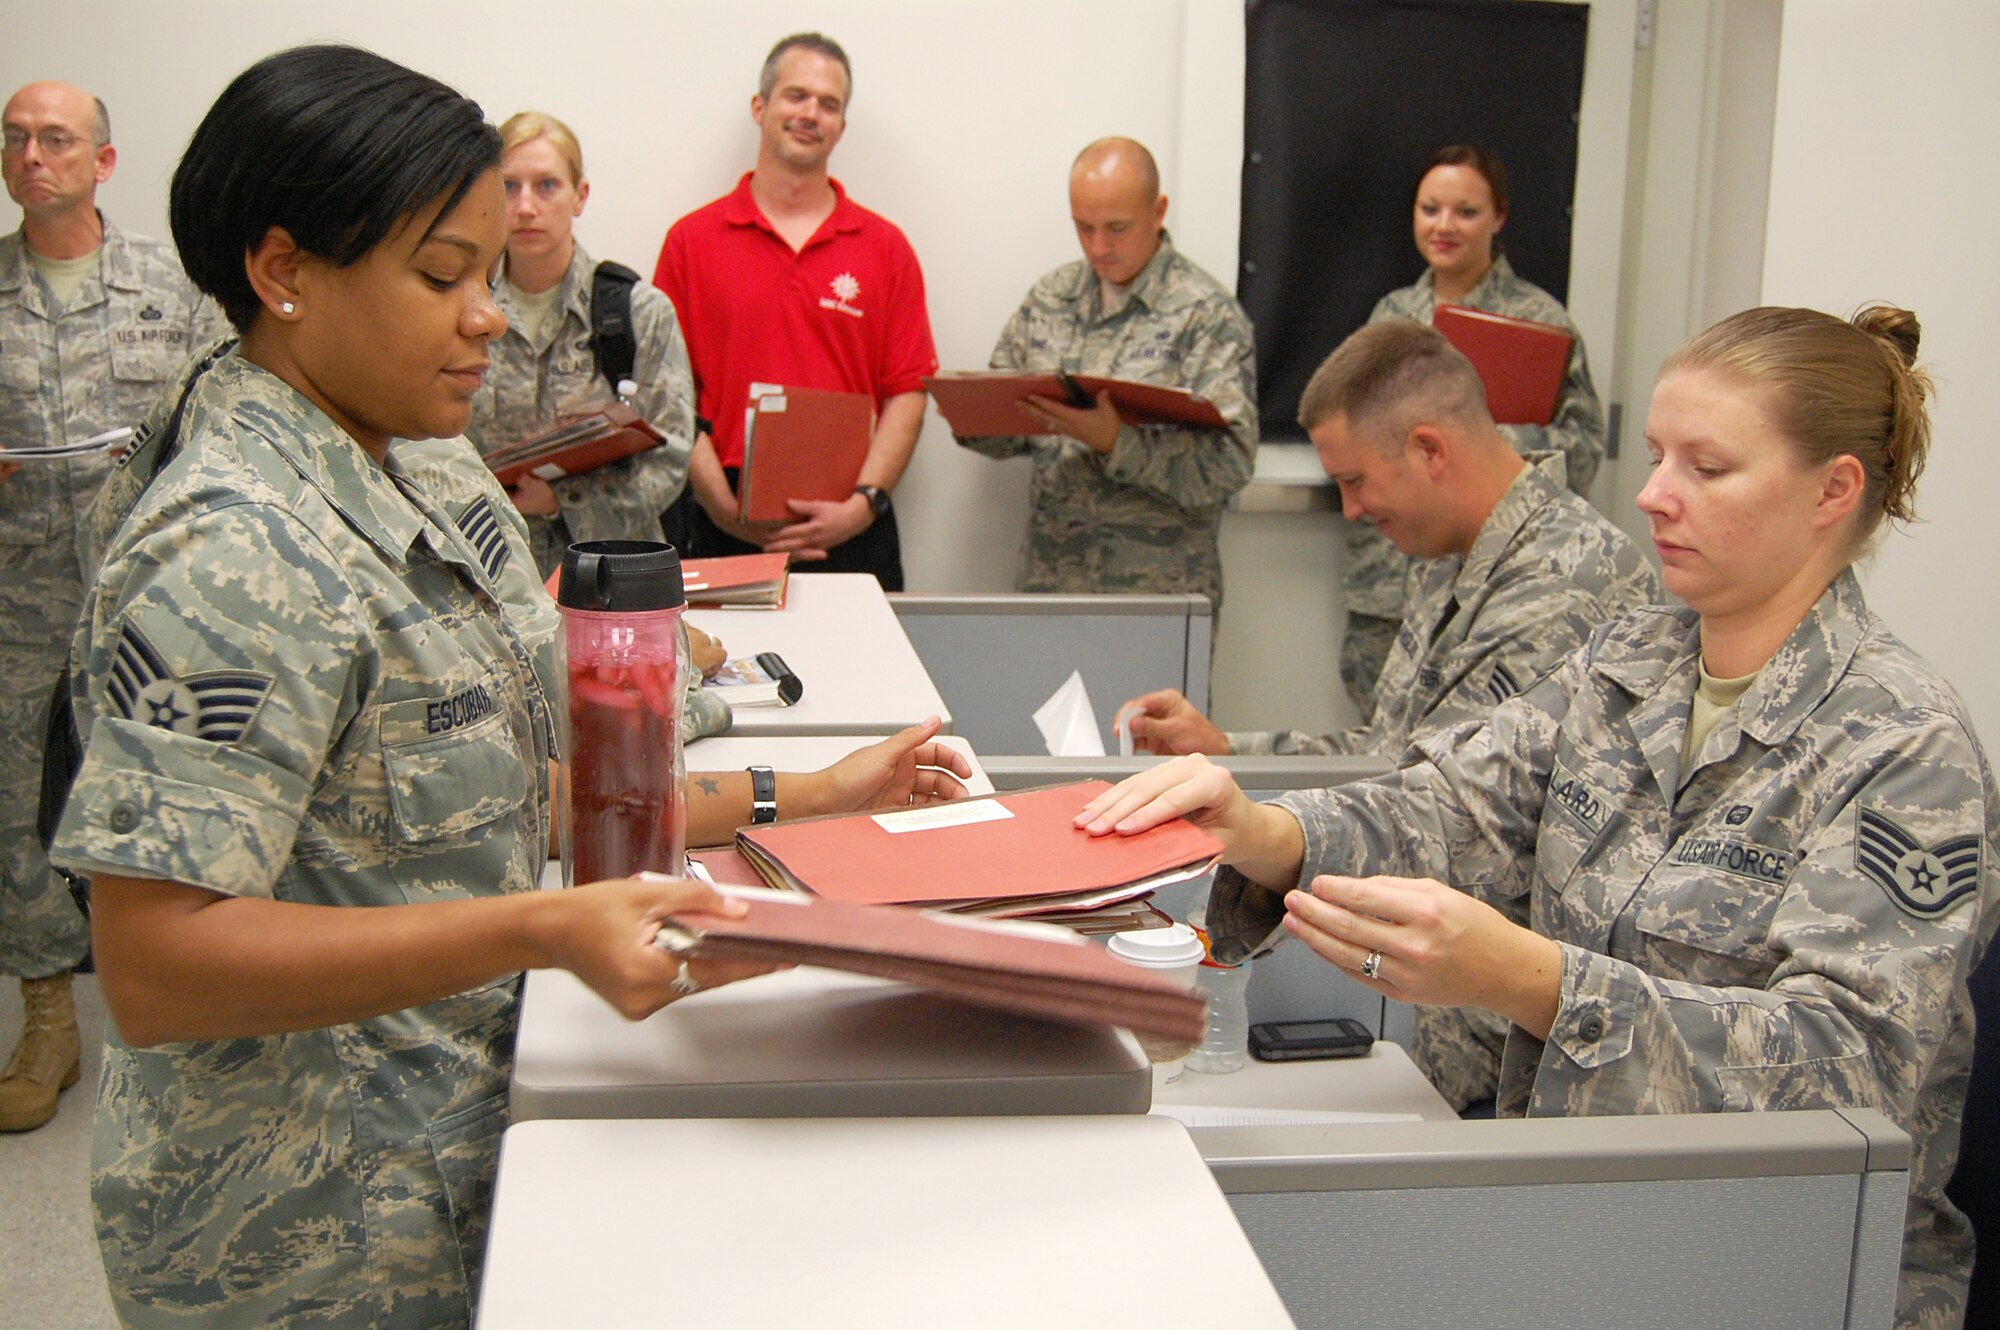 Staff Sgt. Jessica Escobar, Air Force Personnel Center Unit Deployment manager, left, hands Staff Sgt. Stacceye Stallard, 902nd Force Support Squadron, mobility deployment folders at the 902nd Logistics Readiness Squadron Deployment Processing Center on Randolph Air Force Base Aug. 10 during exercise Joint Base San Antonio 10-08. More than 200 Airmen from different agencies on Randolph AFB participated in the two-day deployment exercise. (U.S. Air Force photo/Master Sgt. Paul Kilgallon)